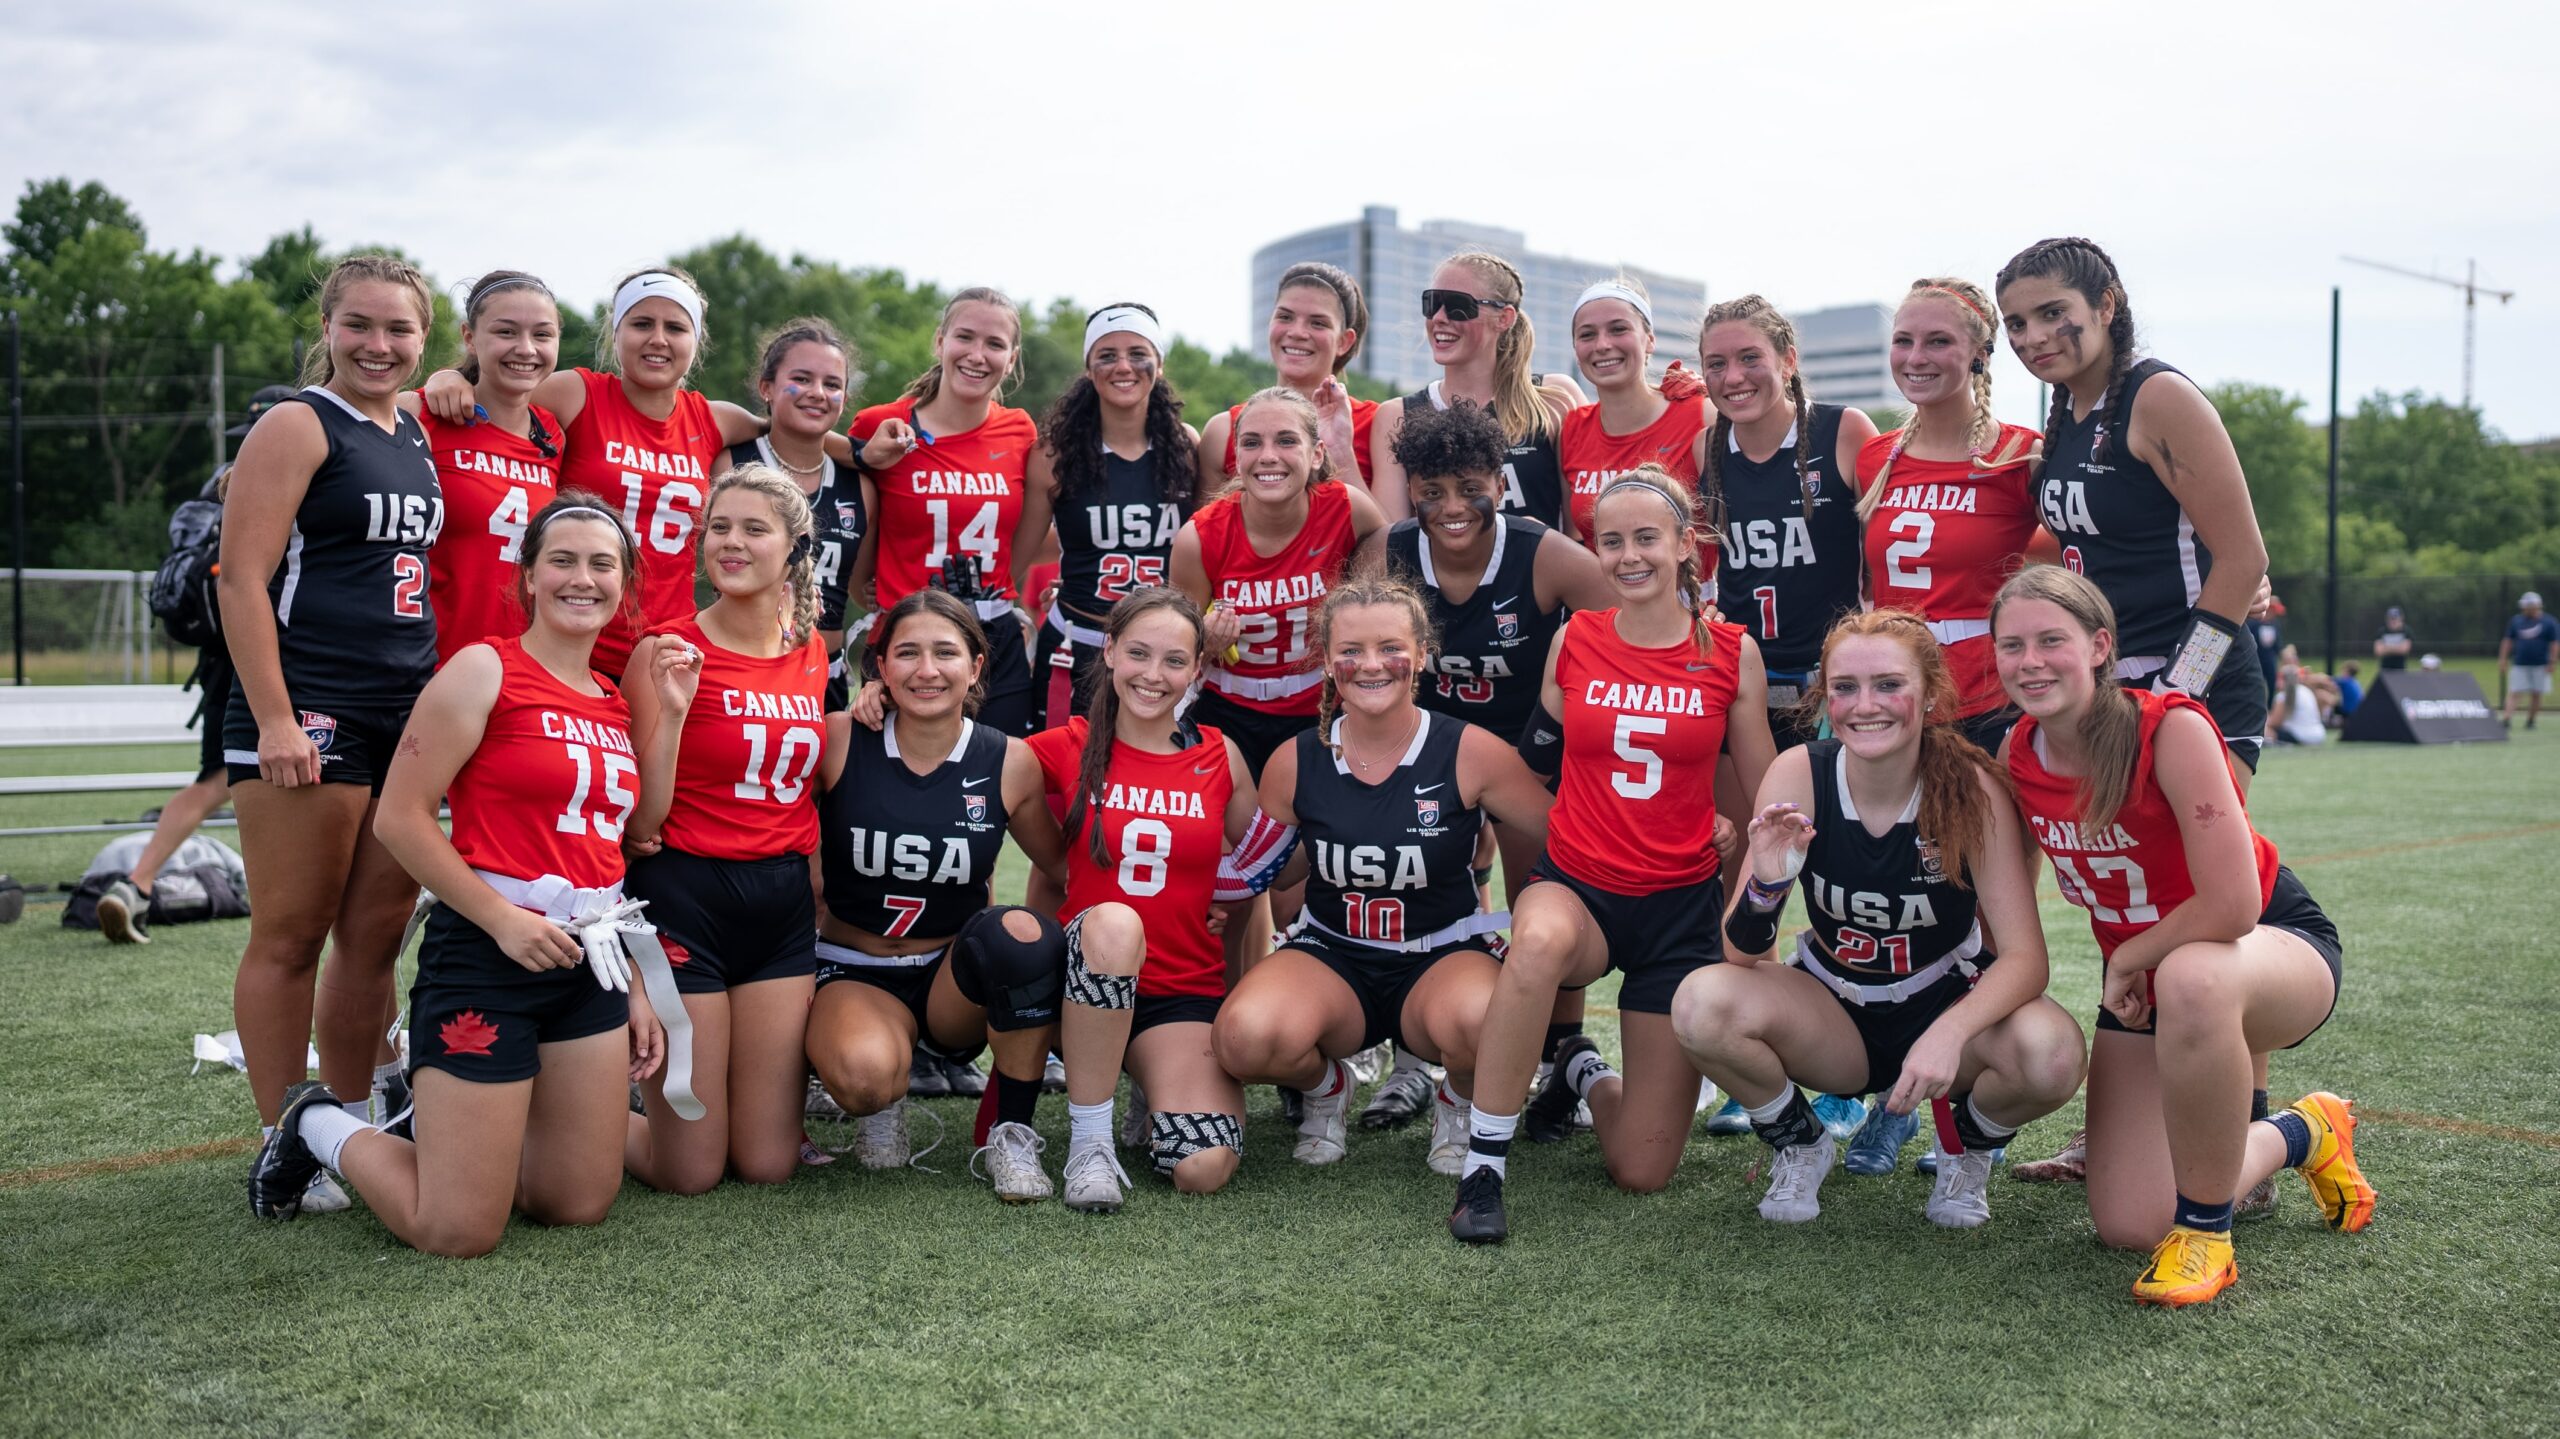 2022 U.S. 17U Girls' Flag National Team posing with a team from Canada at the 2022 Junior Flag International Cup